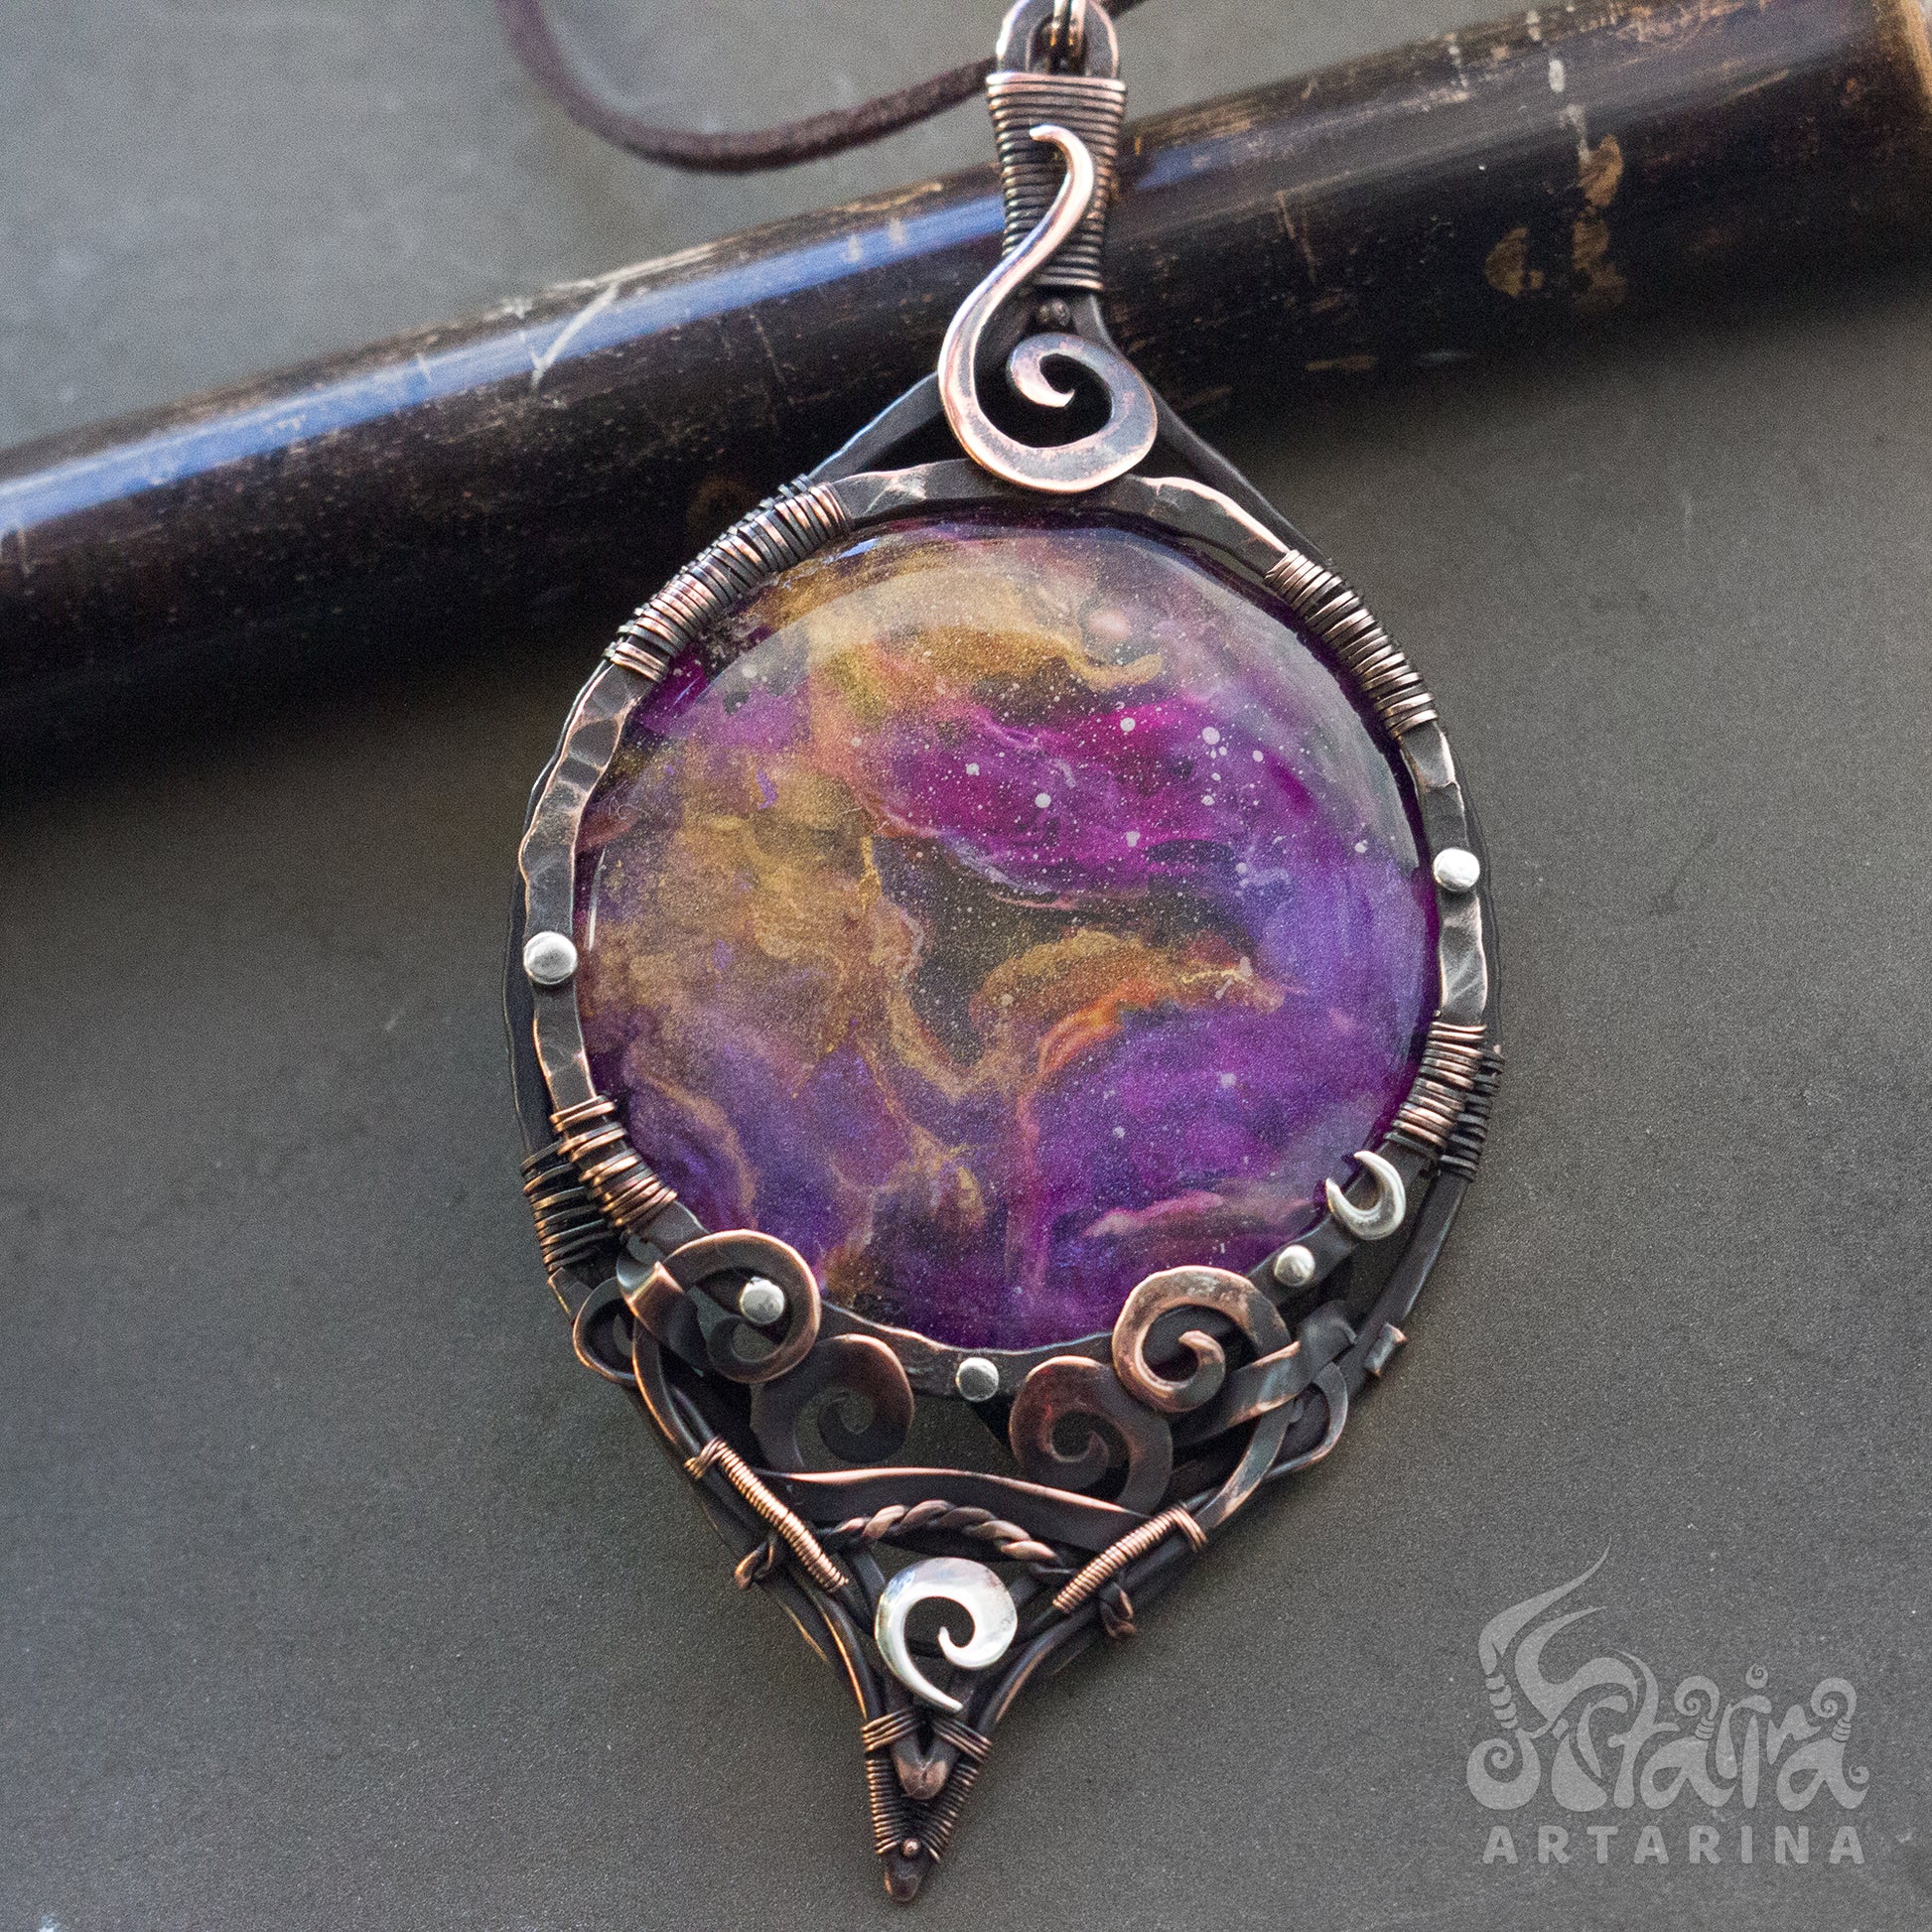 Handcrafted copper necklace featuring a stunning resin cabochon hand-painted to resemble a mesmerizing purple nebula in space pic 3